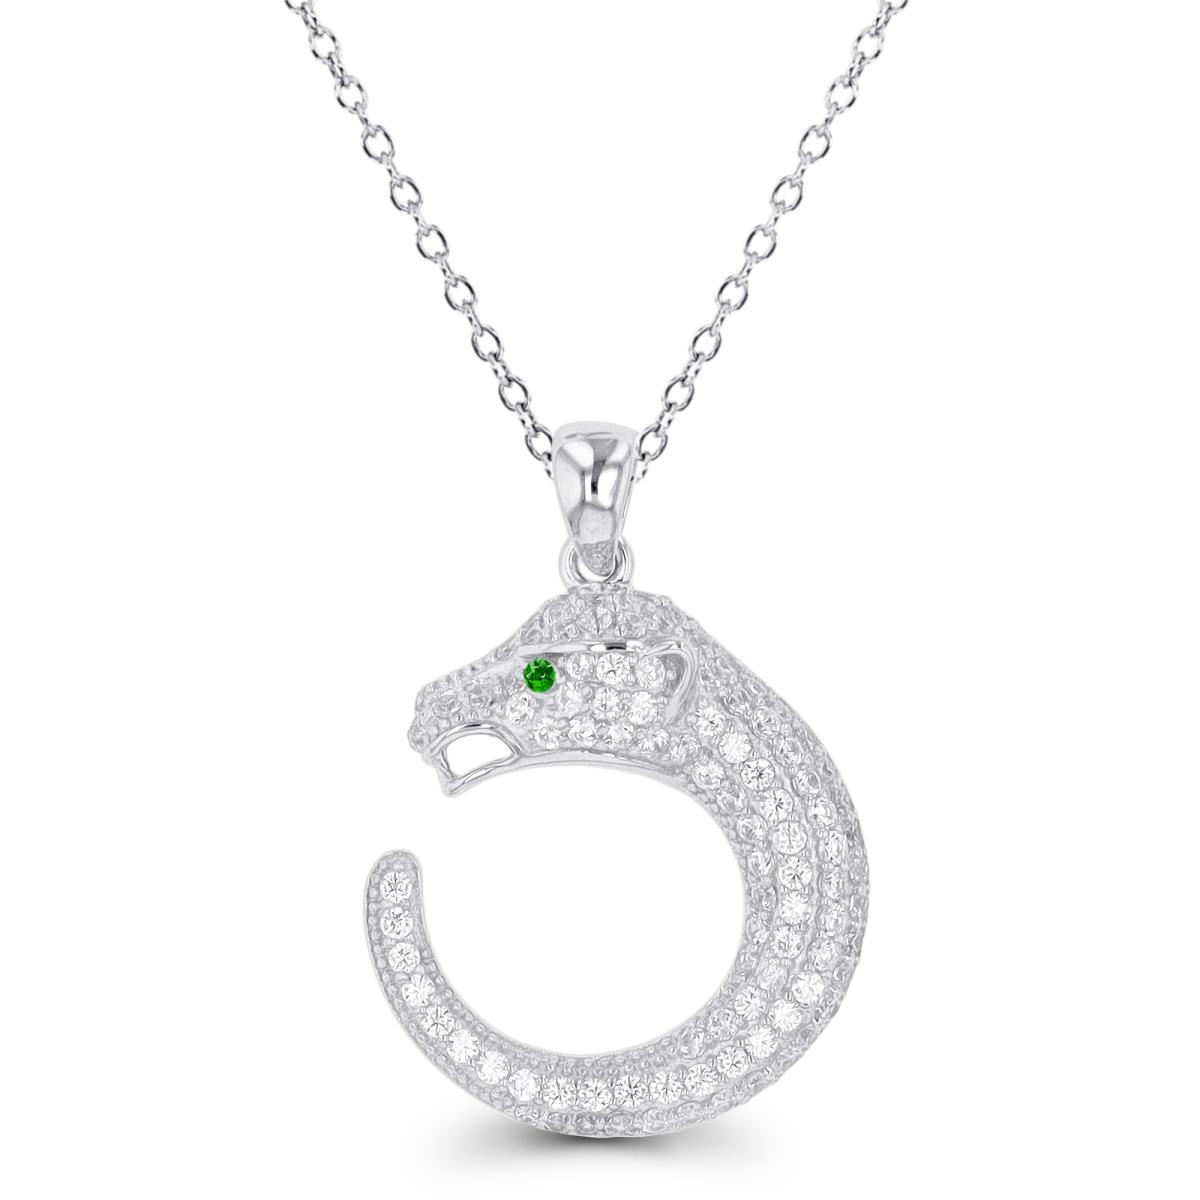 Sterling Silver Rhodium Paved White Zircon & Chrome Diopside Ouroboros 18" Necklace